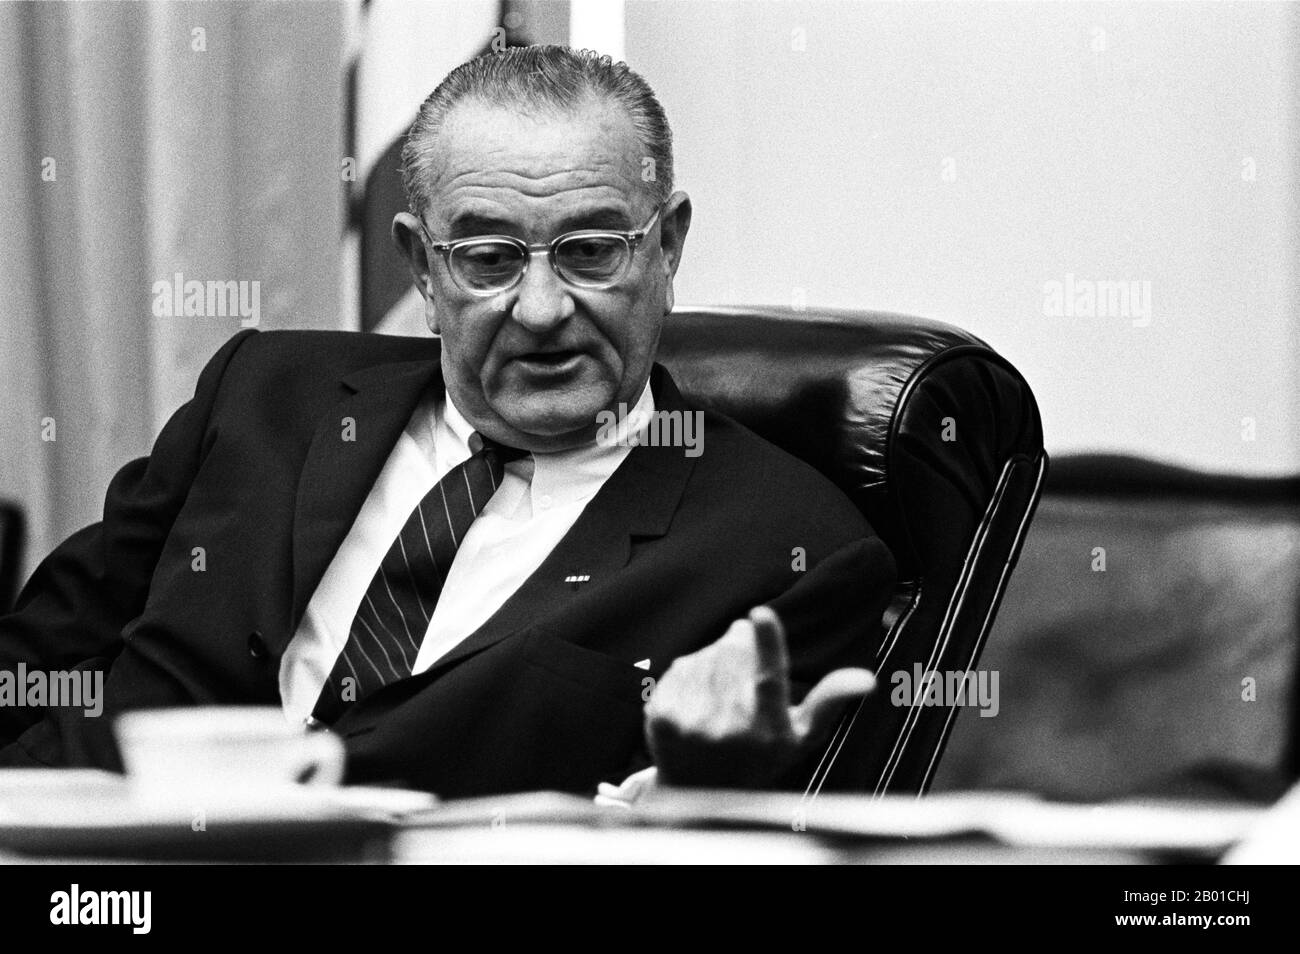 USA/Vietnam: Lyndon Baines Johnson (27 August 1908 - 22 January 1973), often referred to as LBJ, 36th President of the United States (1963-1969), at a National Security meeting on Vietnam in the Cabinet Room of the White House. Photo by Yoichi Okamoto (1915-1985, public domain), 21 July 1965.  The Second Indochina War, known in America as the Vietnam War, was a Cold War era military conflict that occurred in Vietnam, Laos, and Cambodia from 1 November 1955 to the fall of Saigon on 30 April 1975. This war followed the First Indochina War and was fought between North Vietnam and South Vietnam. Stock Photo